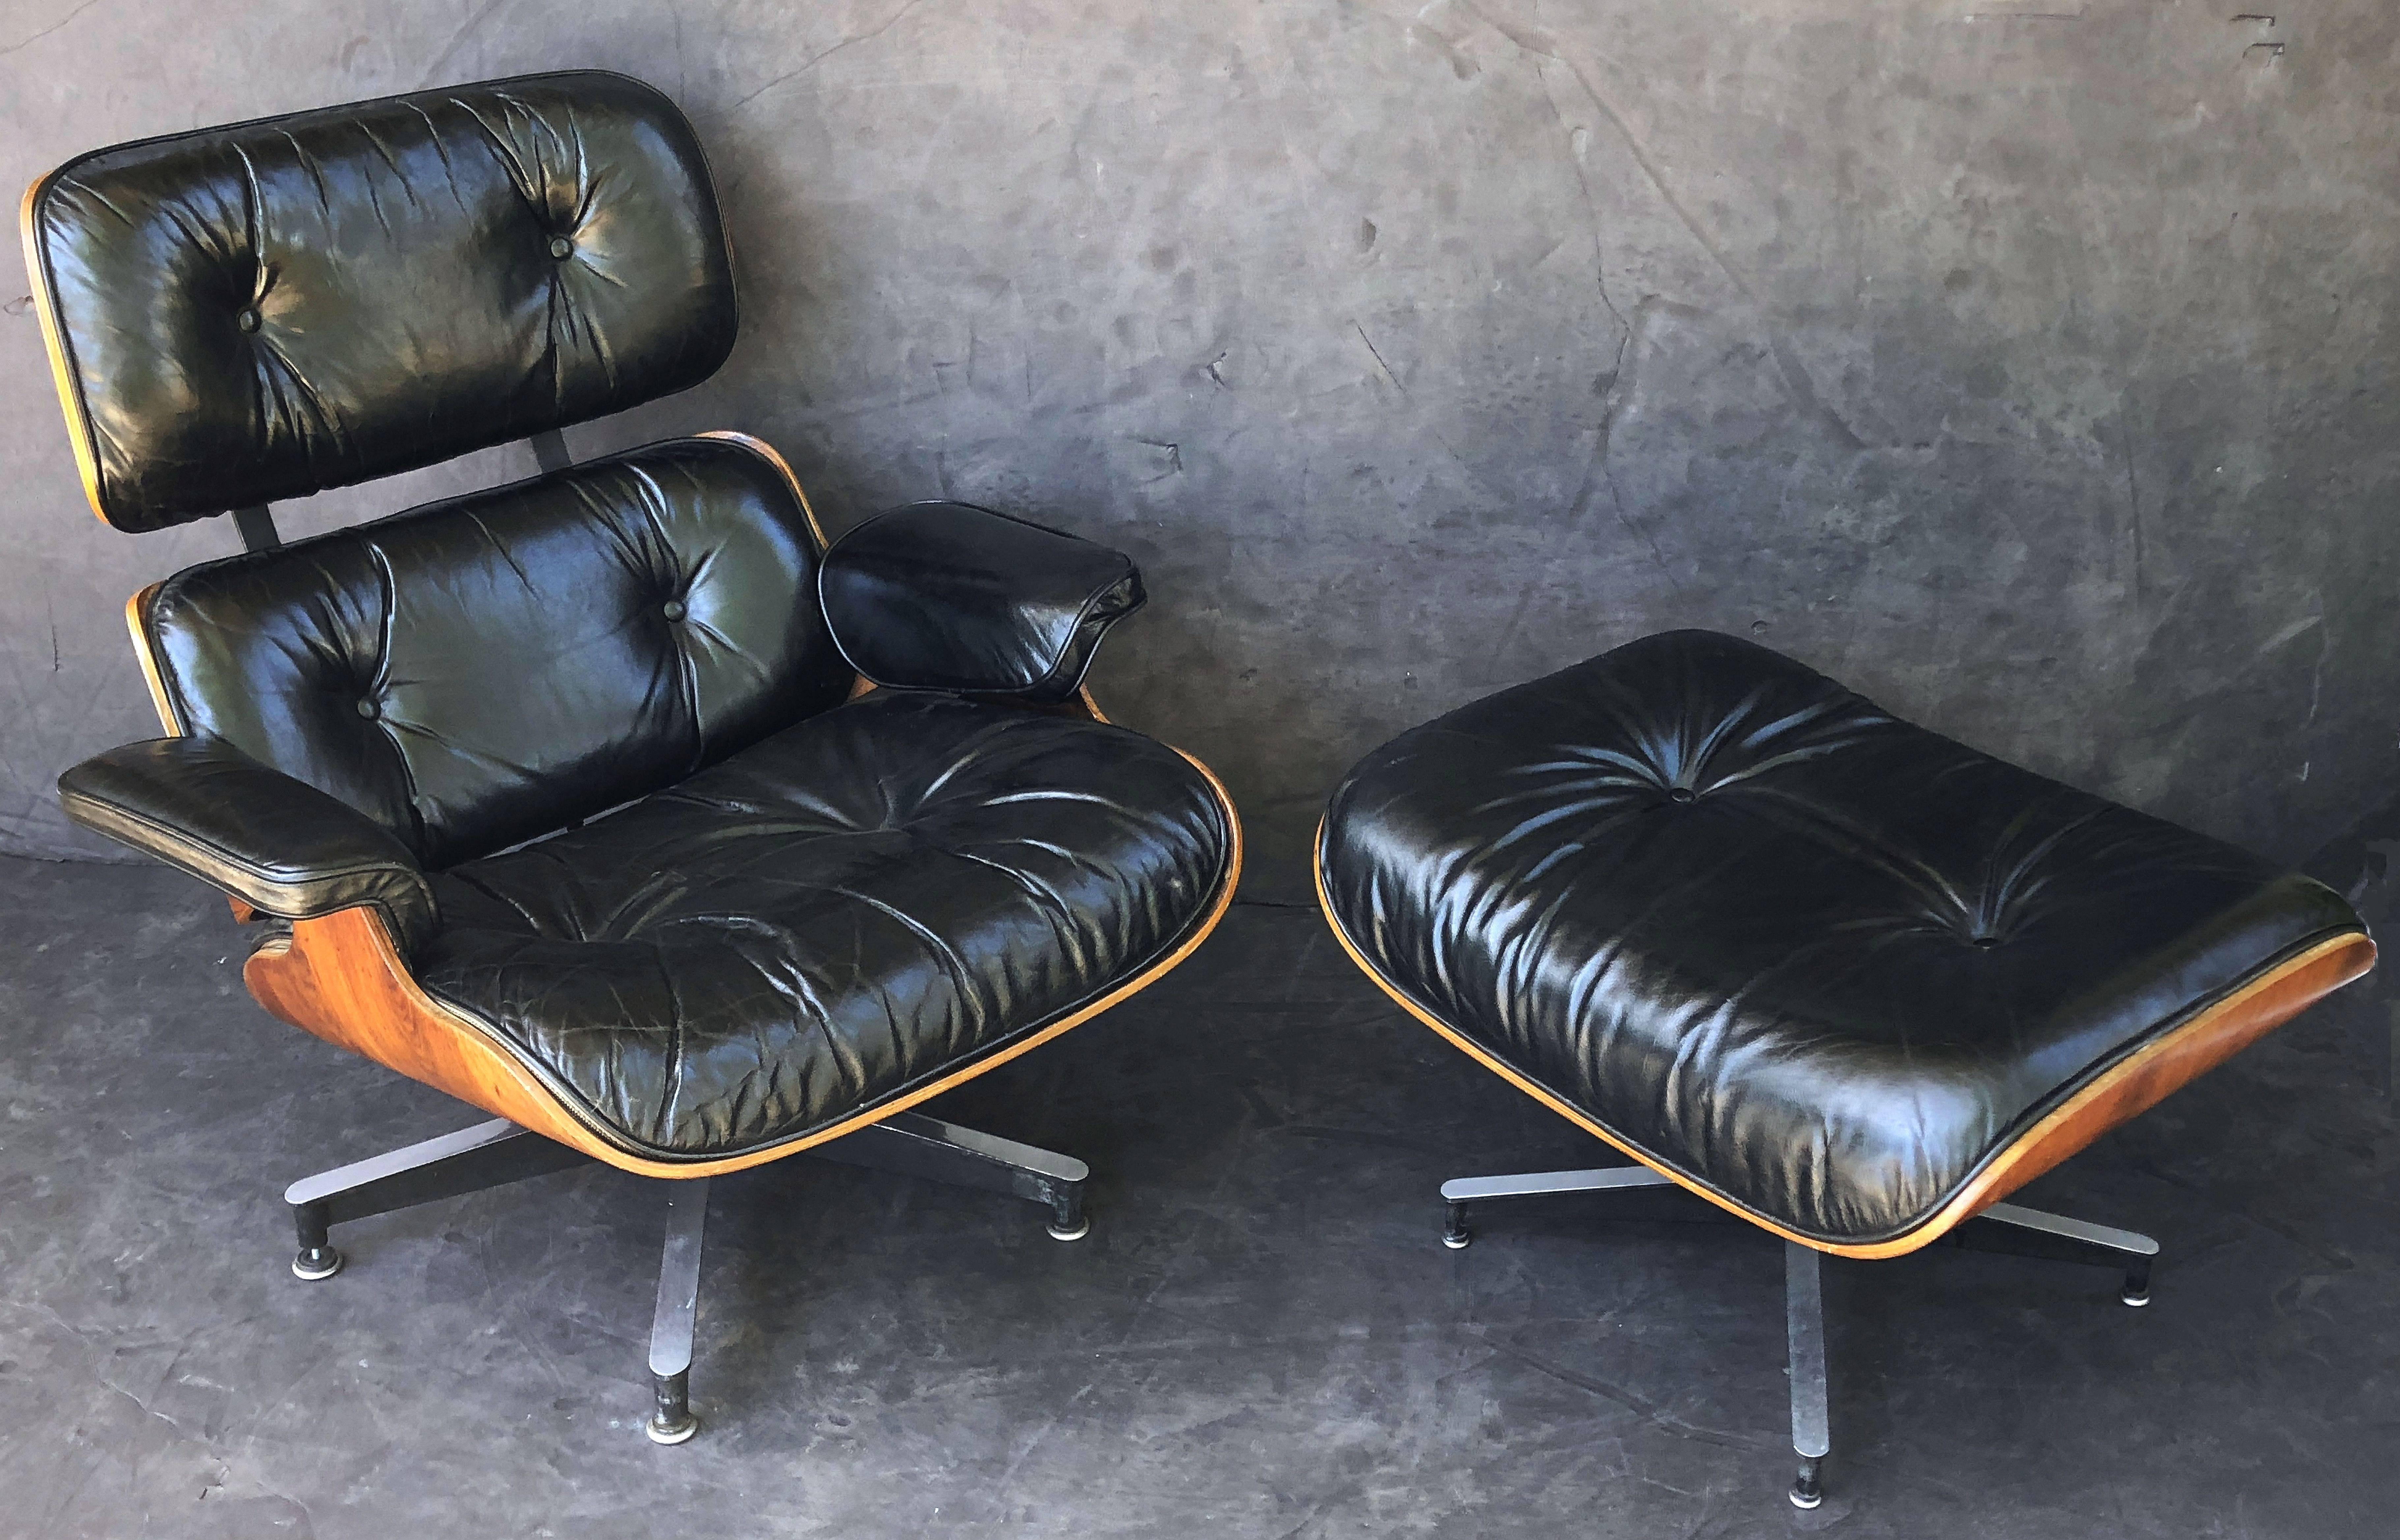 A fine early production Eames lounge chair with ottoman (model: # 670/671) by Herman Miller, circa 1959, with original tufted black leather upholstered cushions. The Brazilian rosewood (Rio Palissander) has a beautiful wood grain and is in excellent